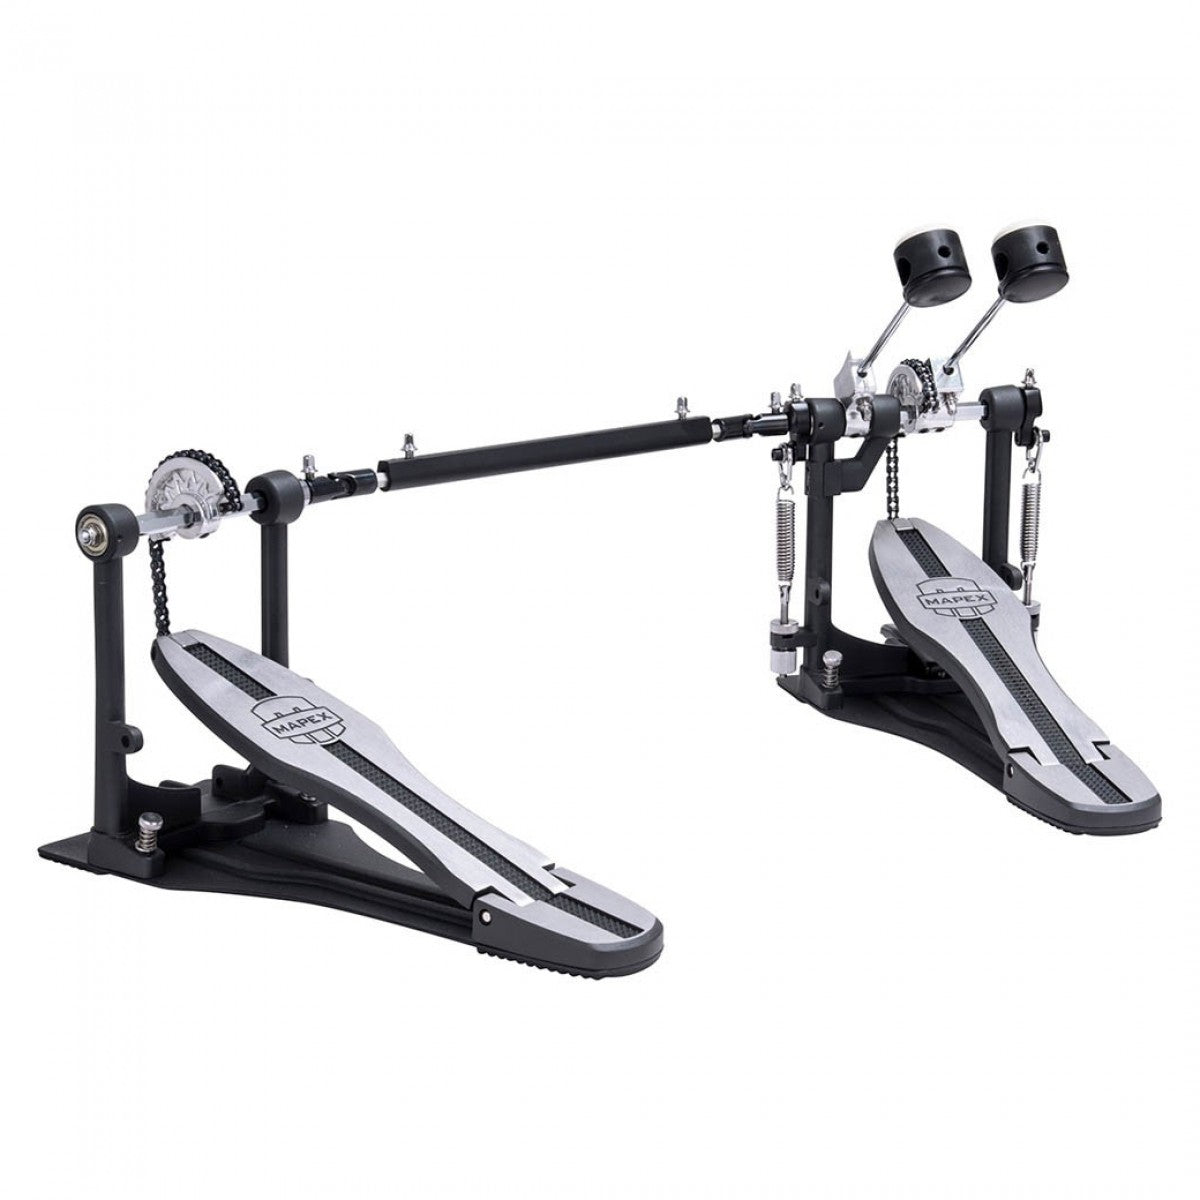 Mapex 400 Series P410TW Double Pedal